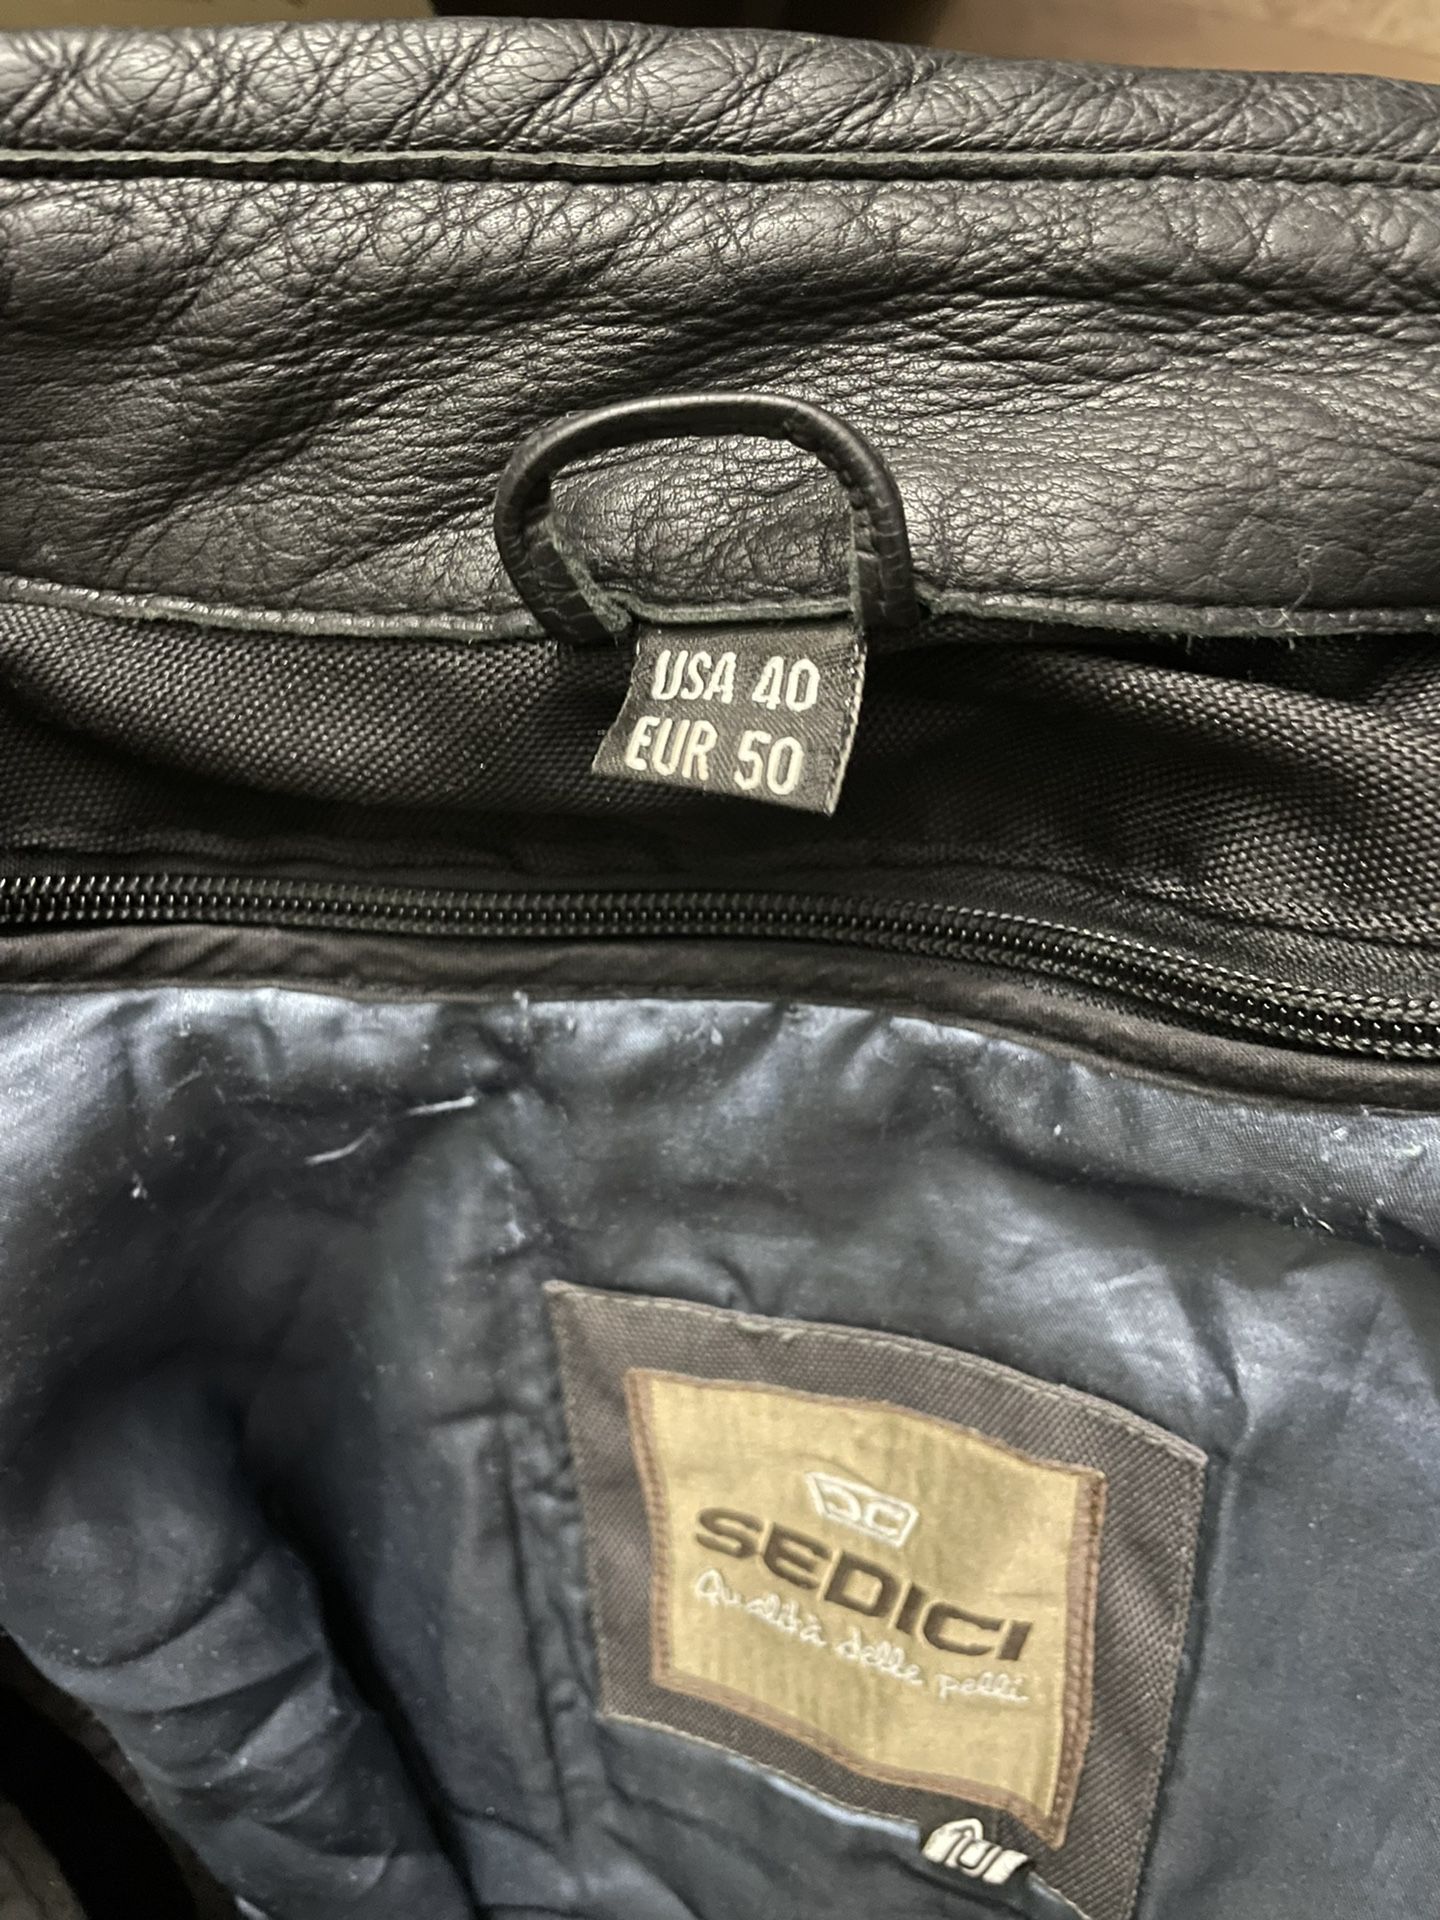 Like New Sedici Motorcycle Jacket Body Armor And Removable Liner